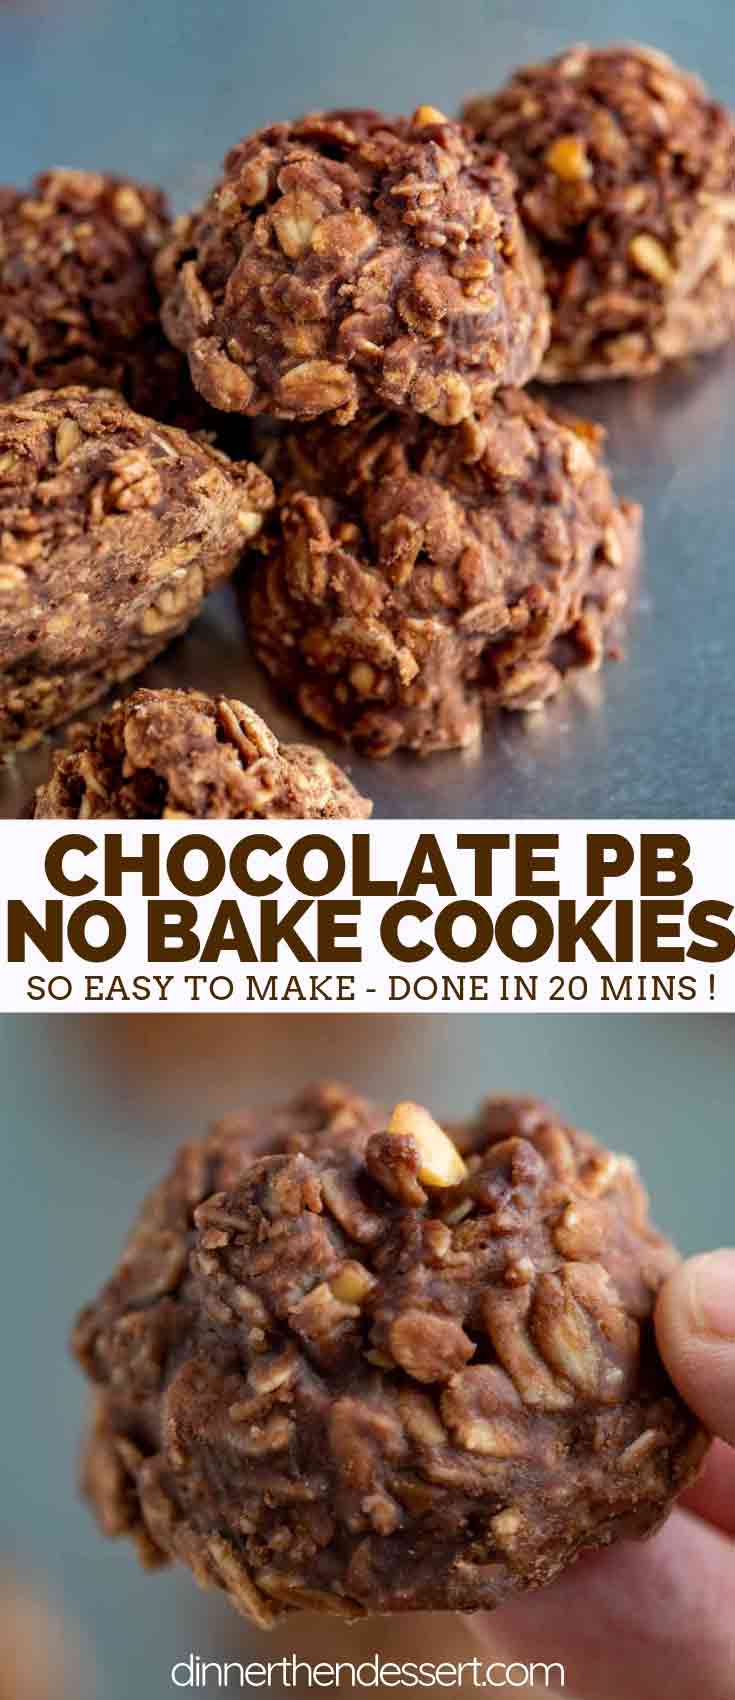 No-Bake Cookies with Peanut Butter and Chocolate